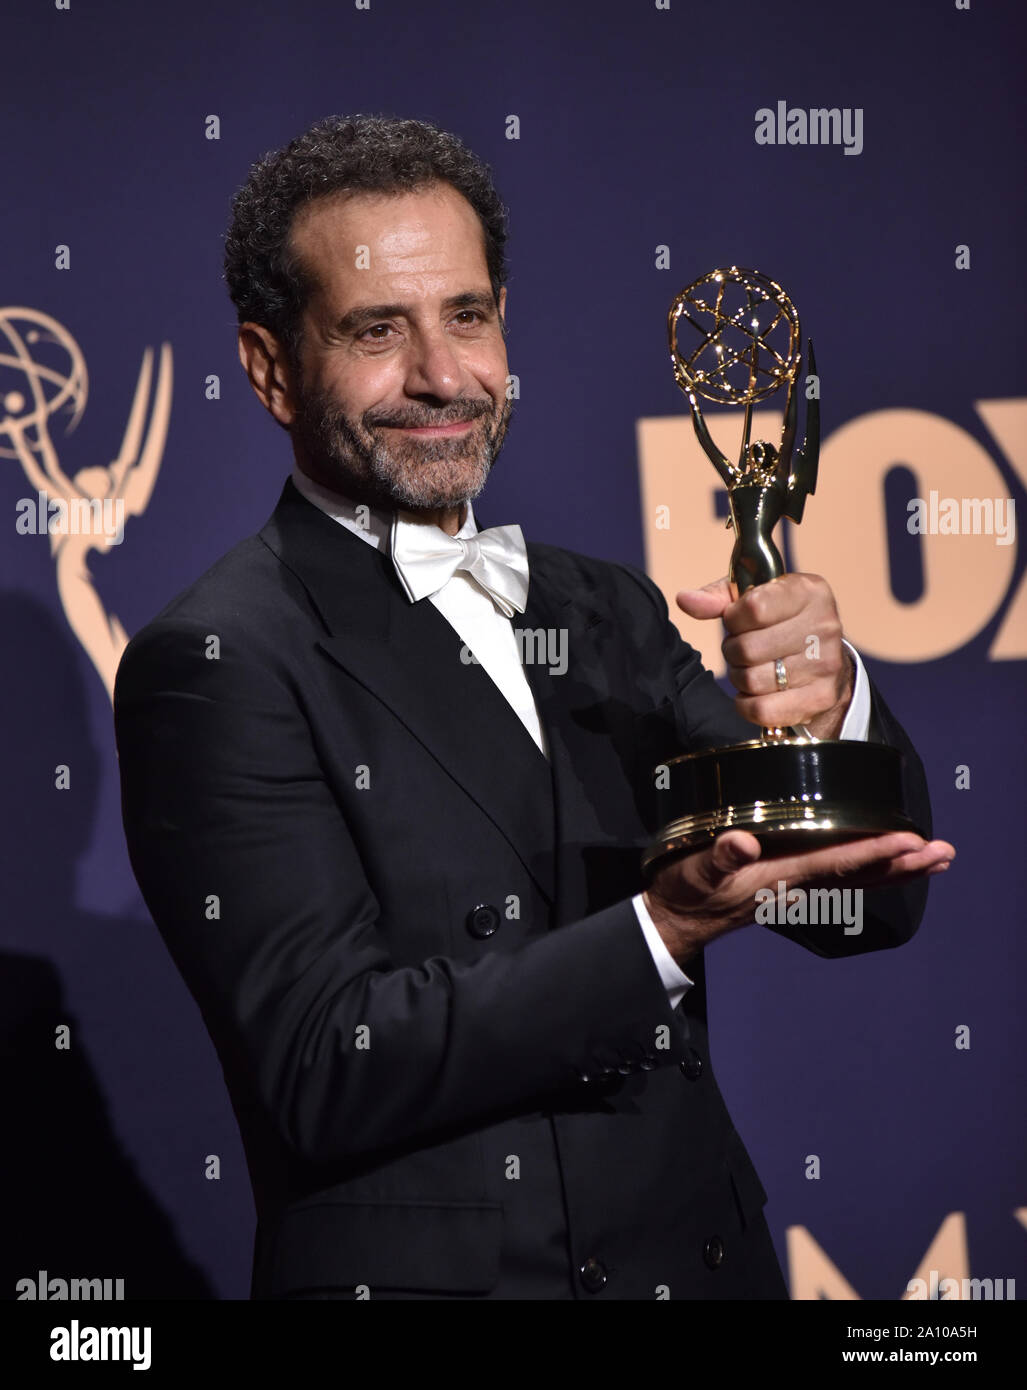 Tony Shalhoub, winner of the award for Outstanding Supporting Actor in a Comedy Series for 'The Marvelous Mrs. Maisel' appears backstage during the 71st annual Primetime Emmy Awards held at the Microsoft Theater in downtown Los Angeles on Sunday, September 22, 2019. Photo by Christine Chew/UPI Stock Photo